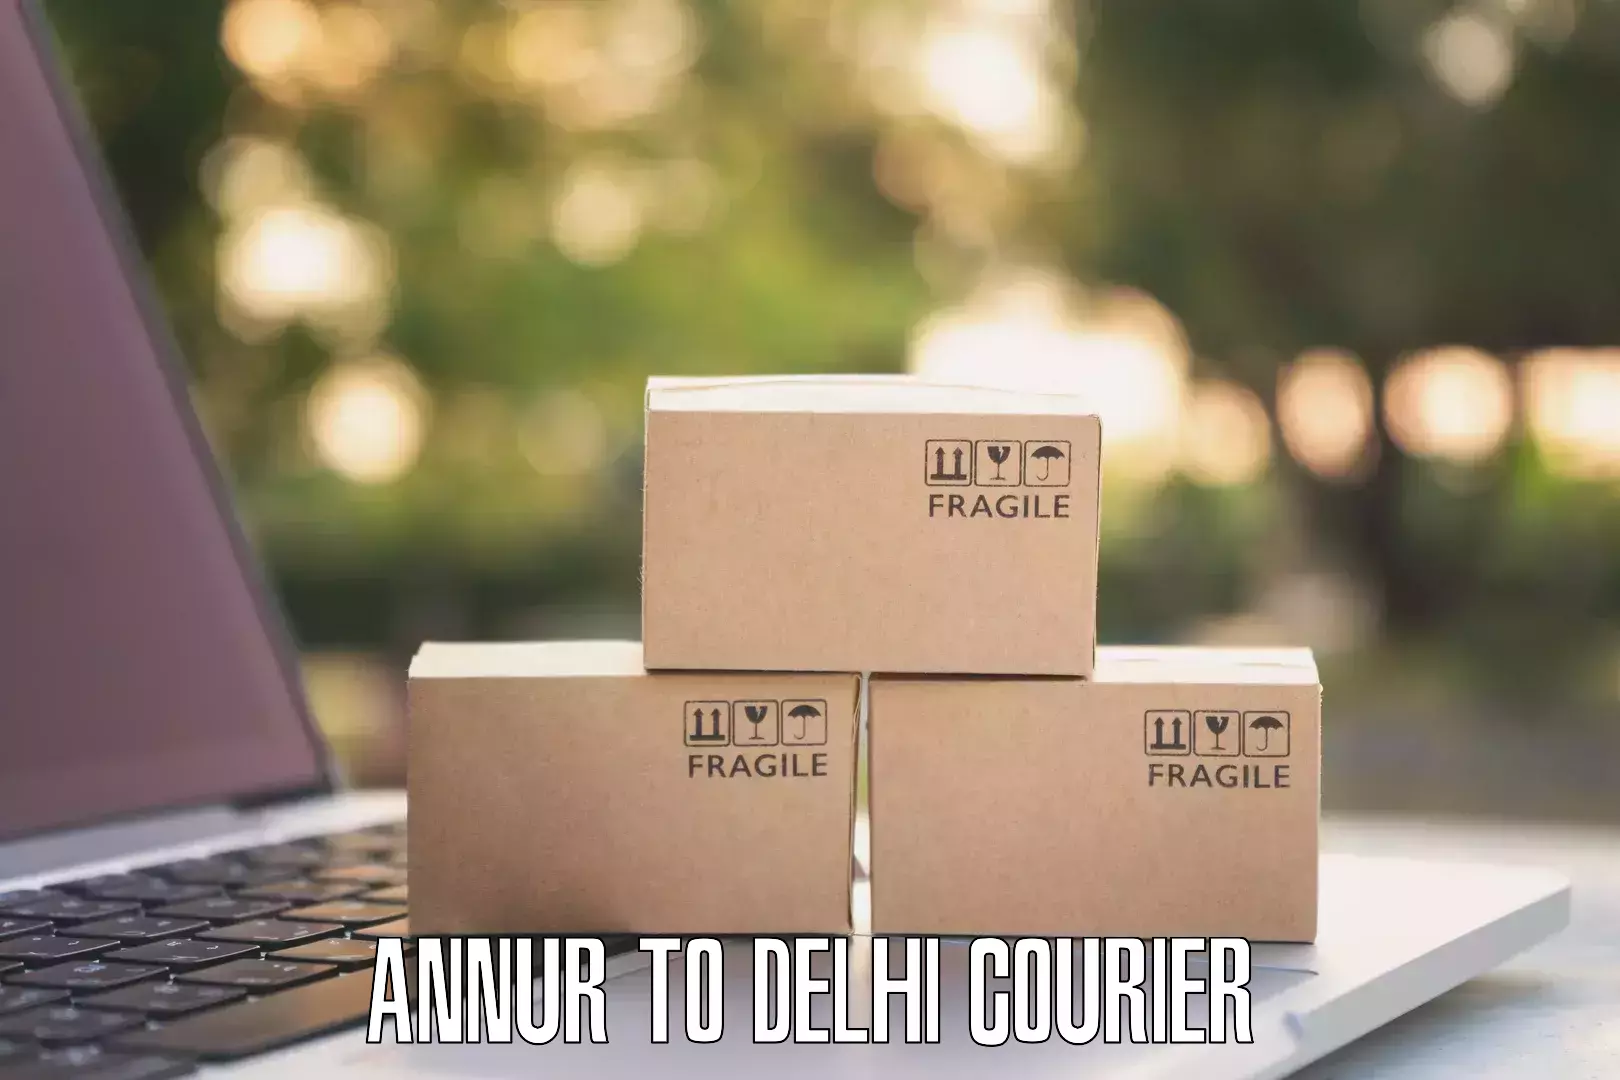 On-call courier service Annur to Delhi